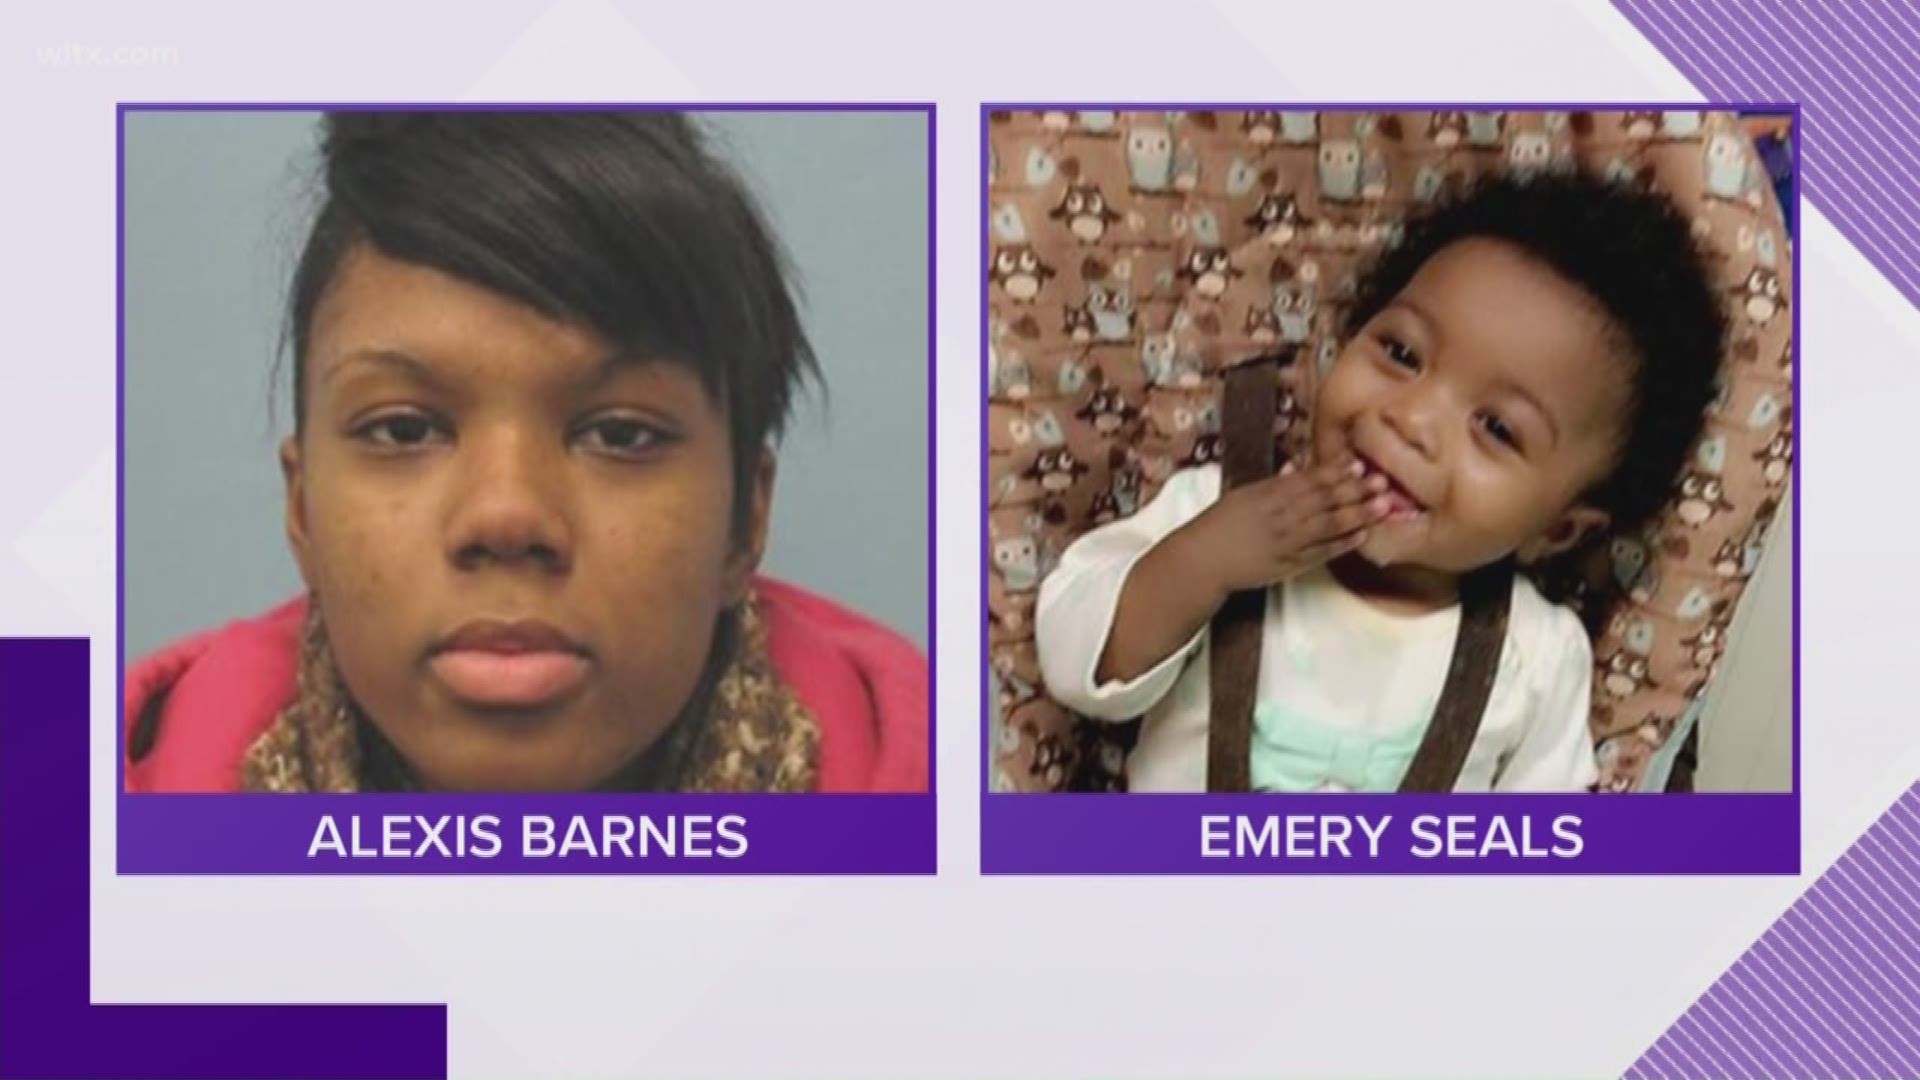 A missing child that triggered an Amber Alert in Ohio was ultimately found in South Carolina.